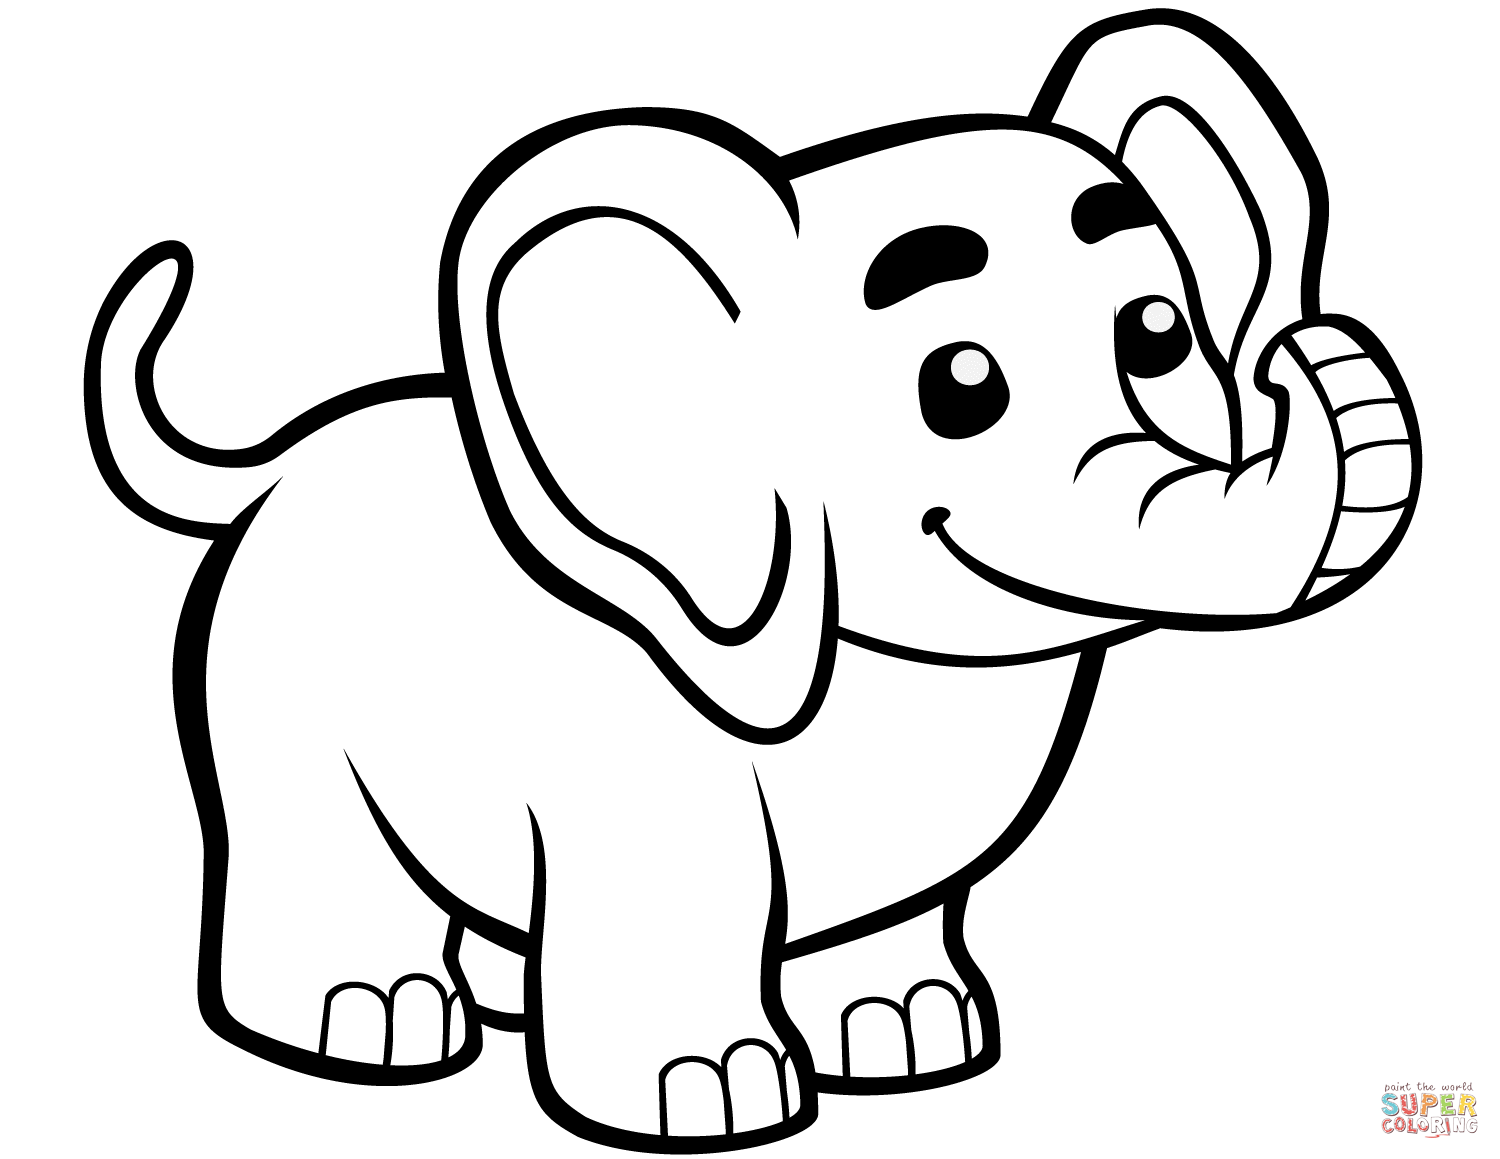 Cute baby elephant coloring page free printable coloring pages